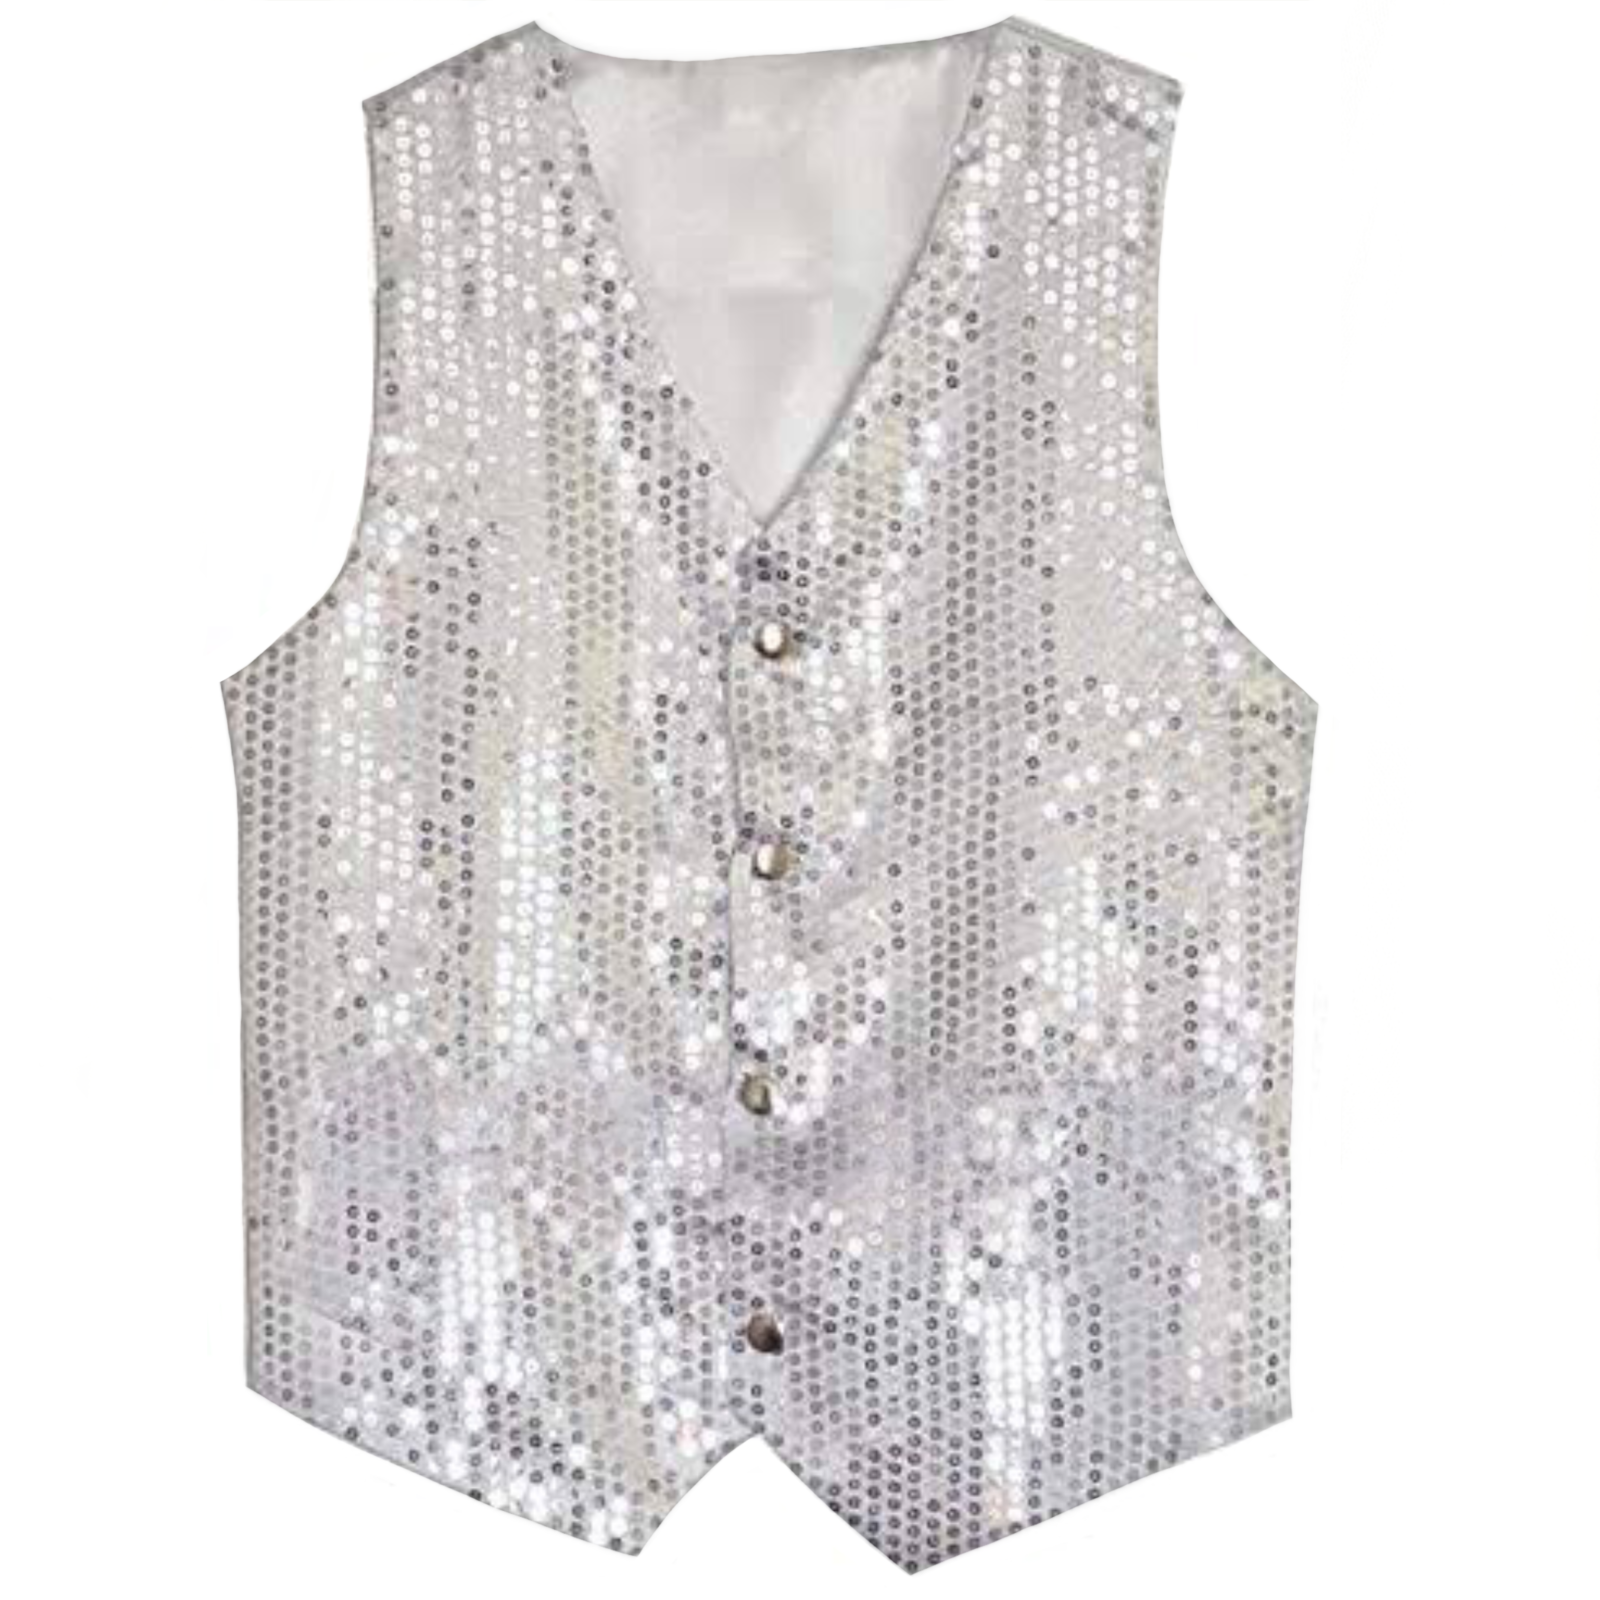 Superior Quality Sequined Vest with buttons - Silver